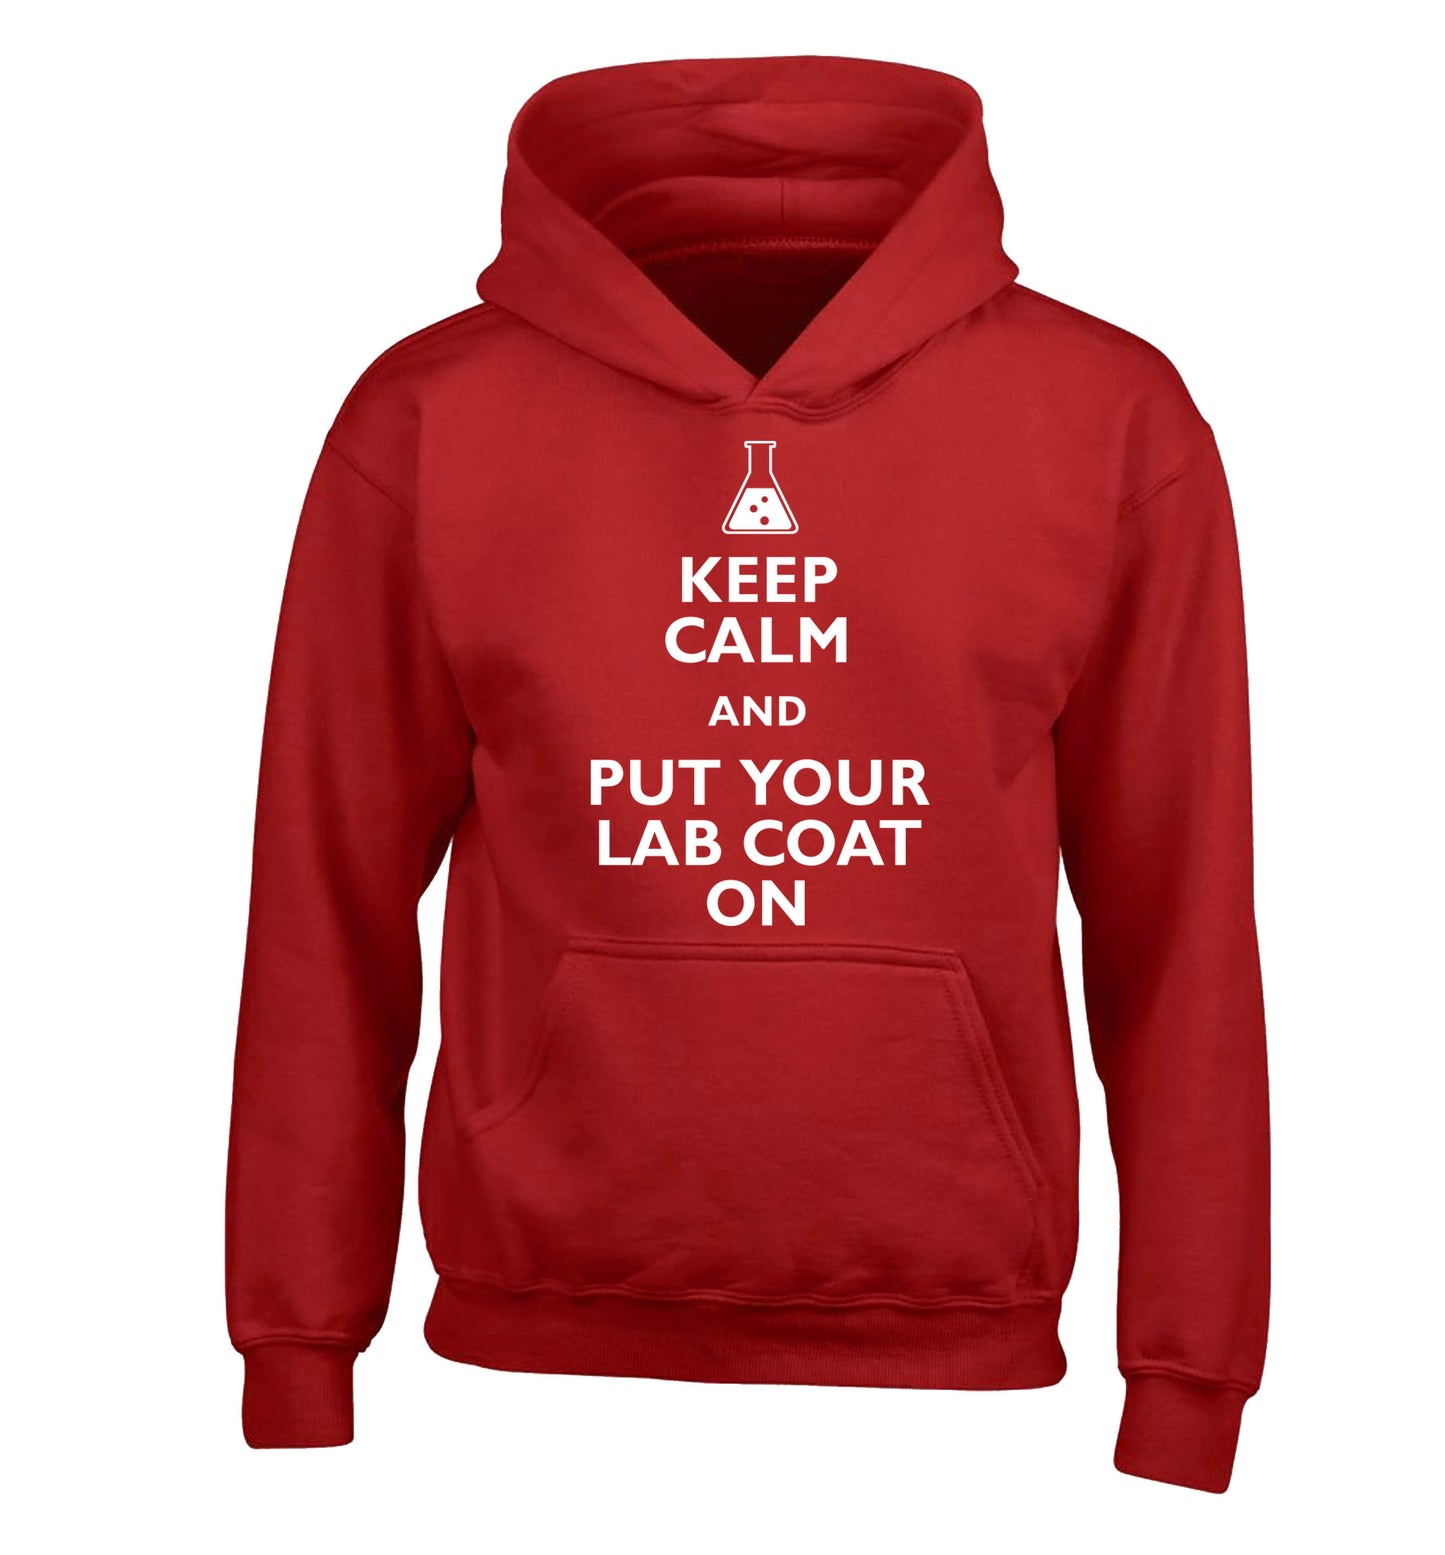 Keep calm and put your lab coat on children's red hoodie 12-14 Years